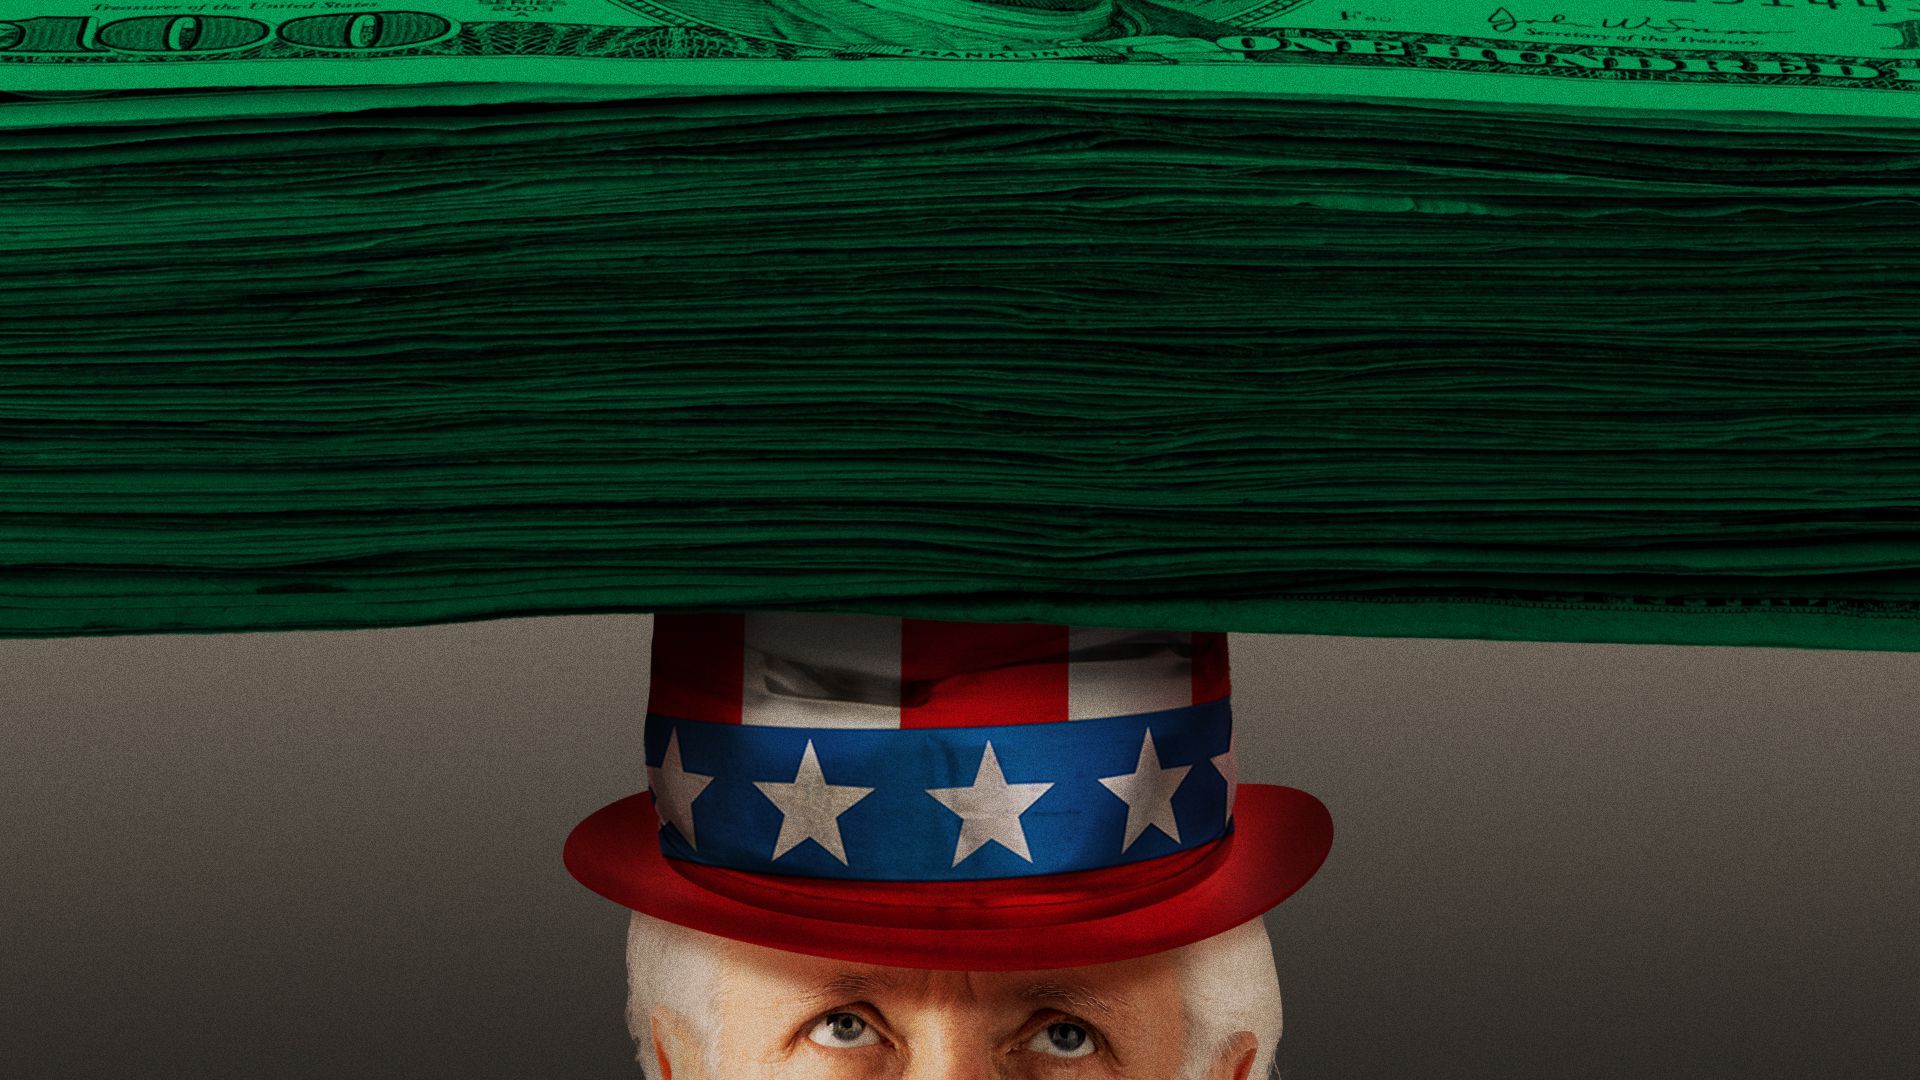 Illustration of a stack of bills crushing Uncle Sam's hat.